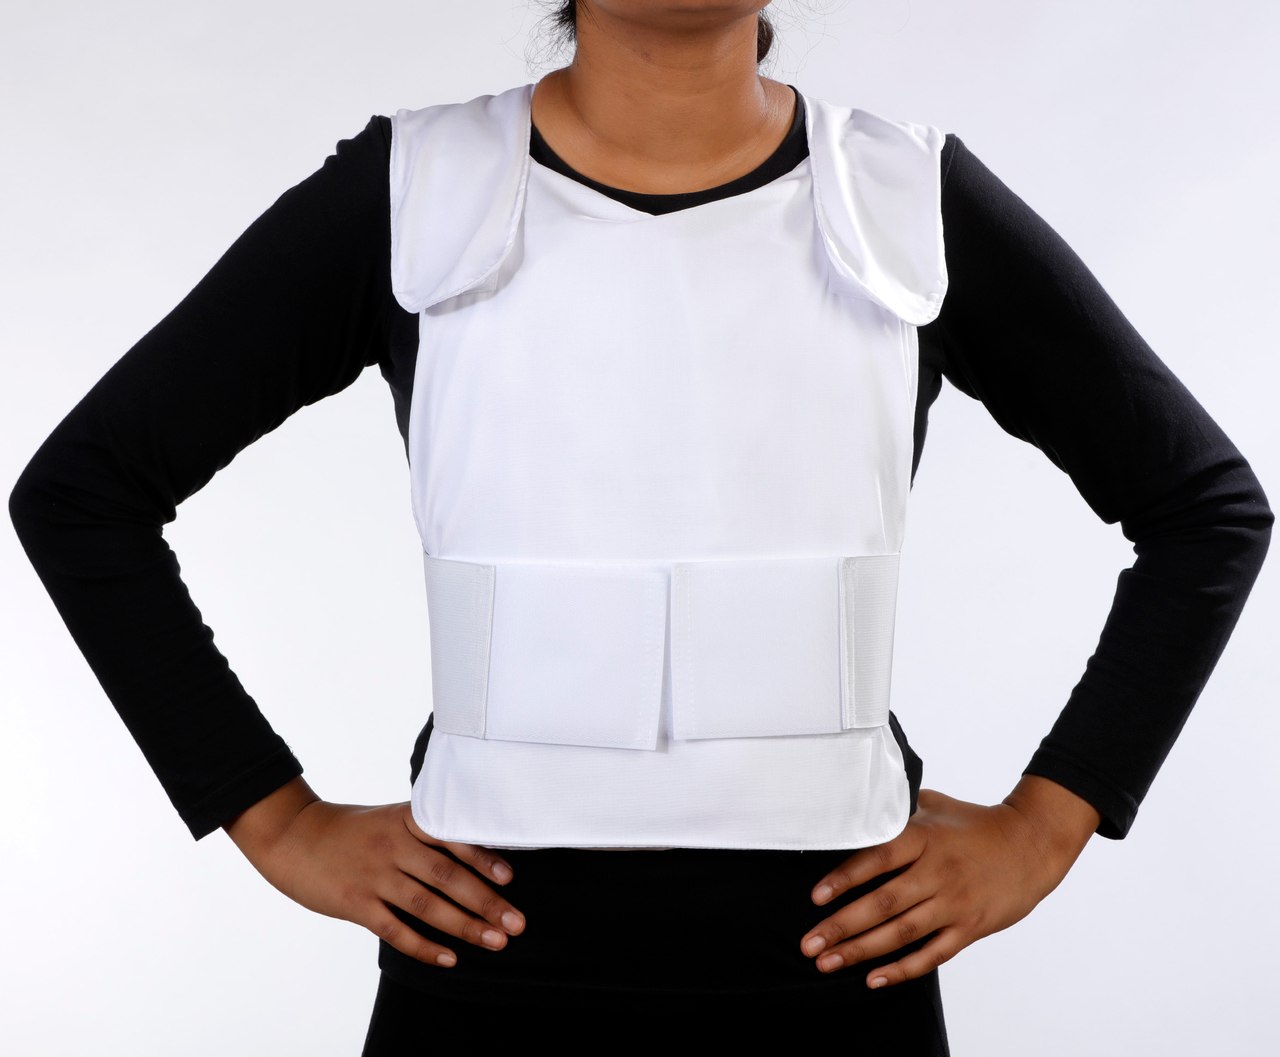 Concealable Cool Vest, white, with nontoxic cooling packs